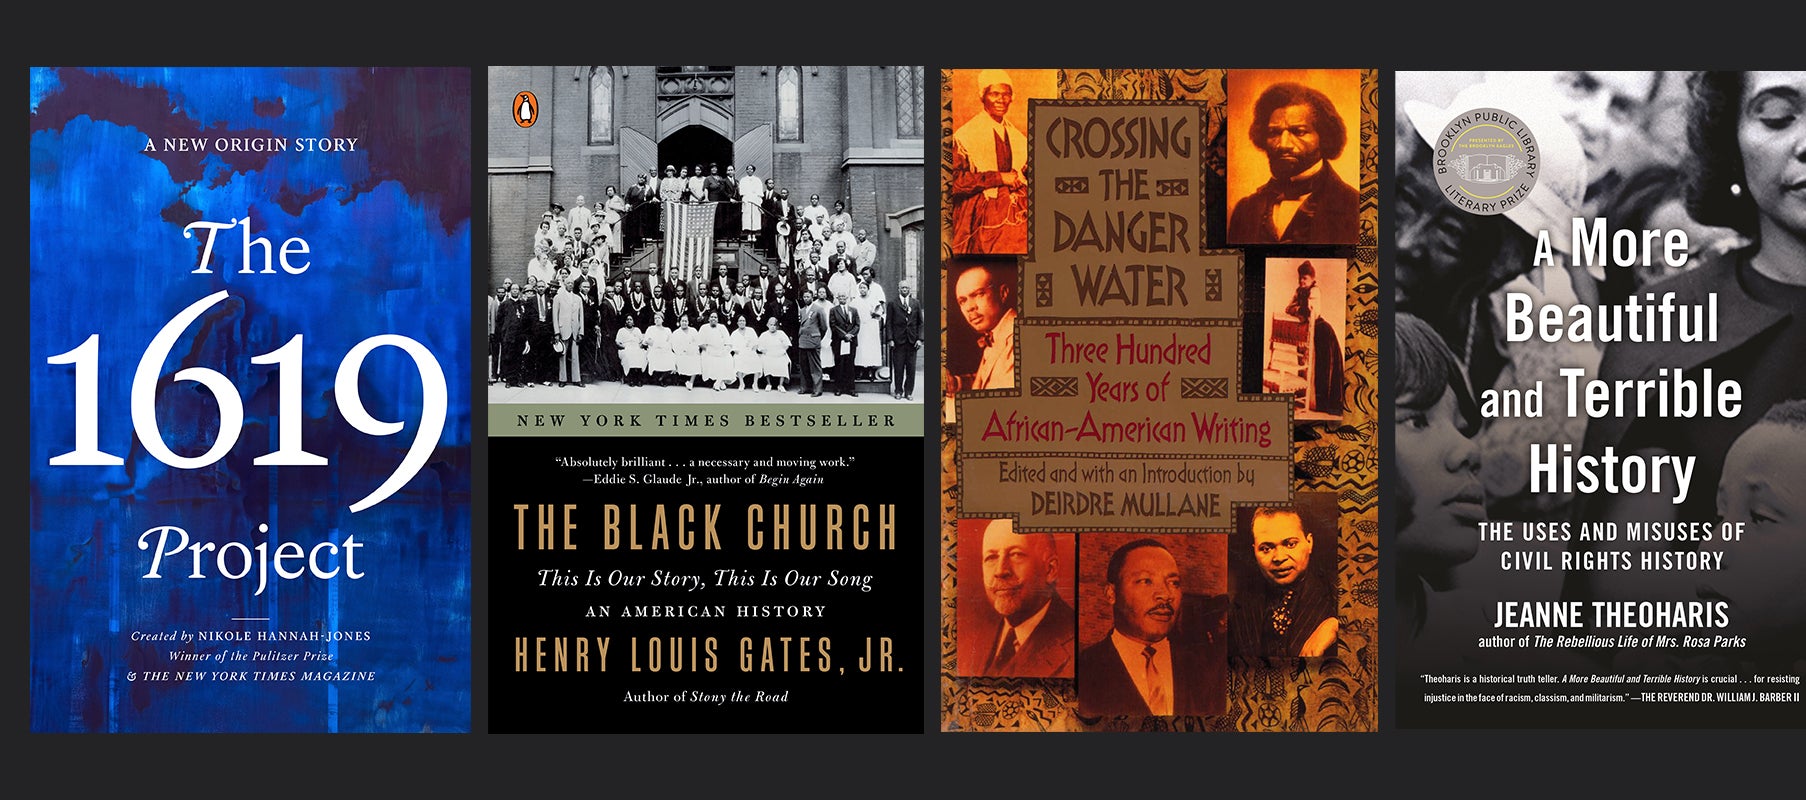 Books for Black History Month